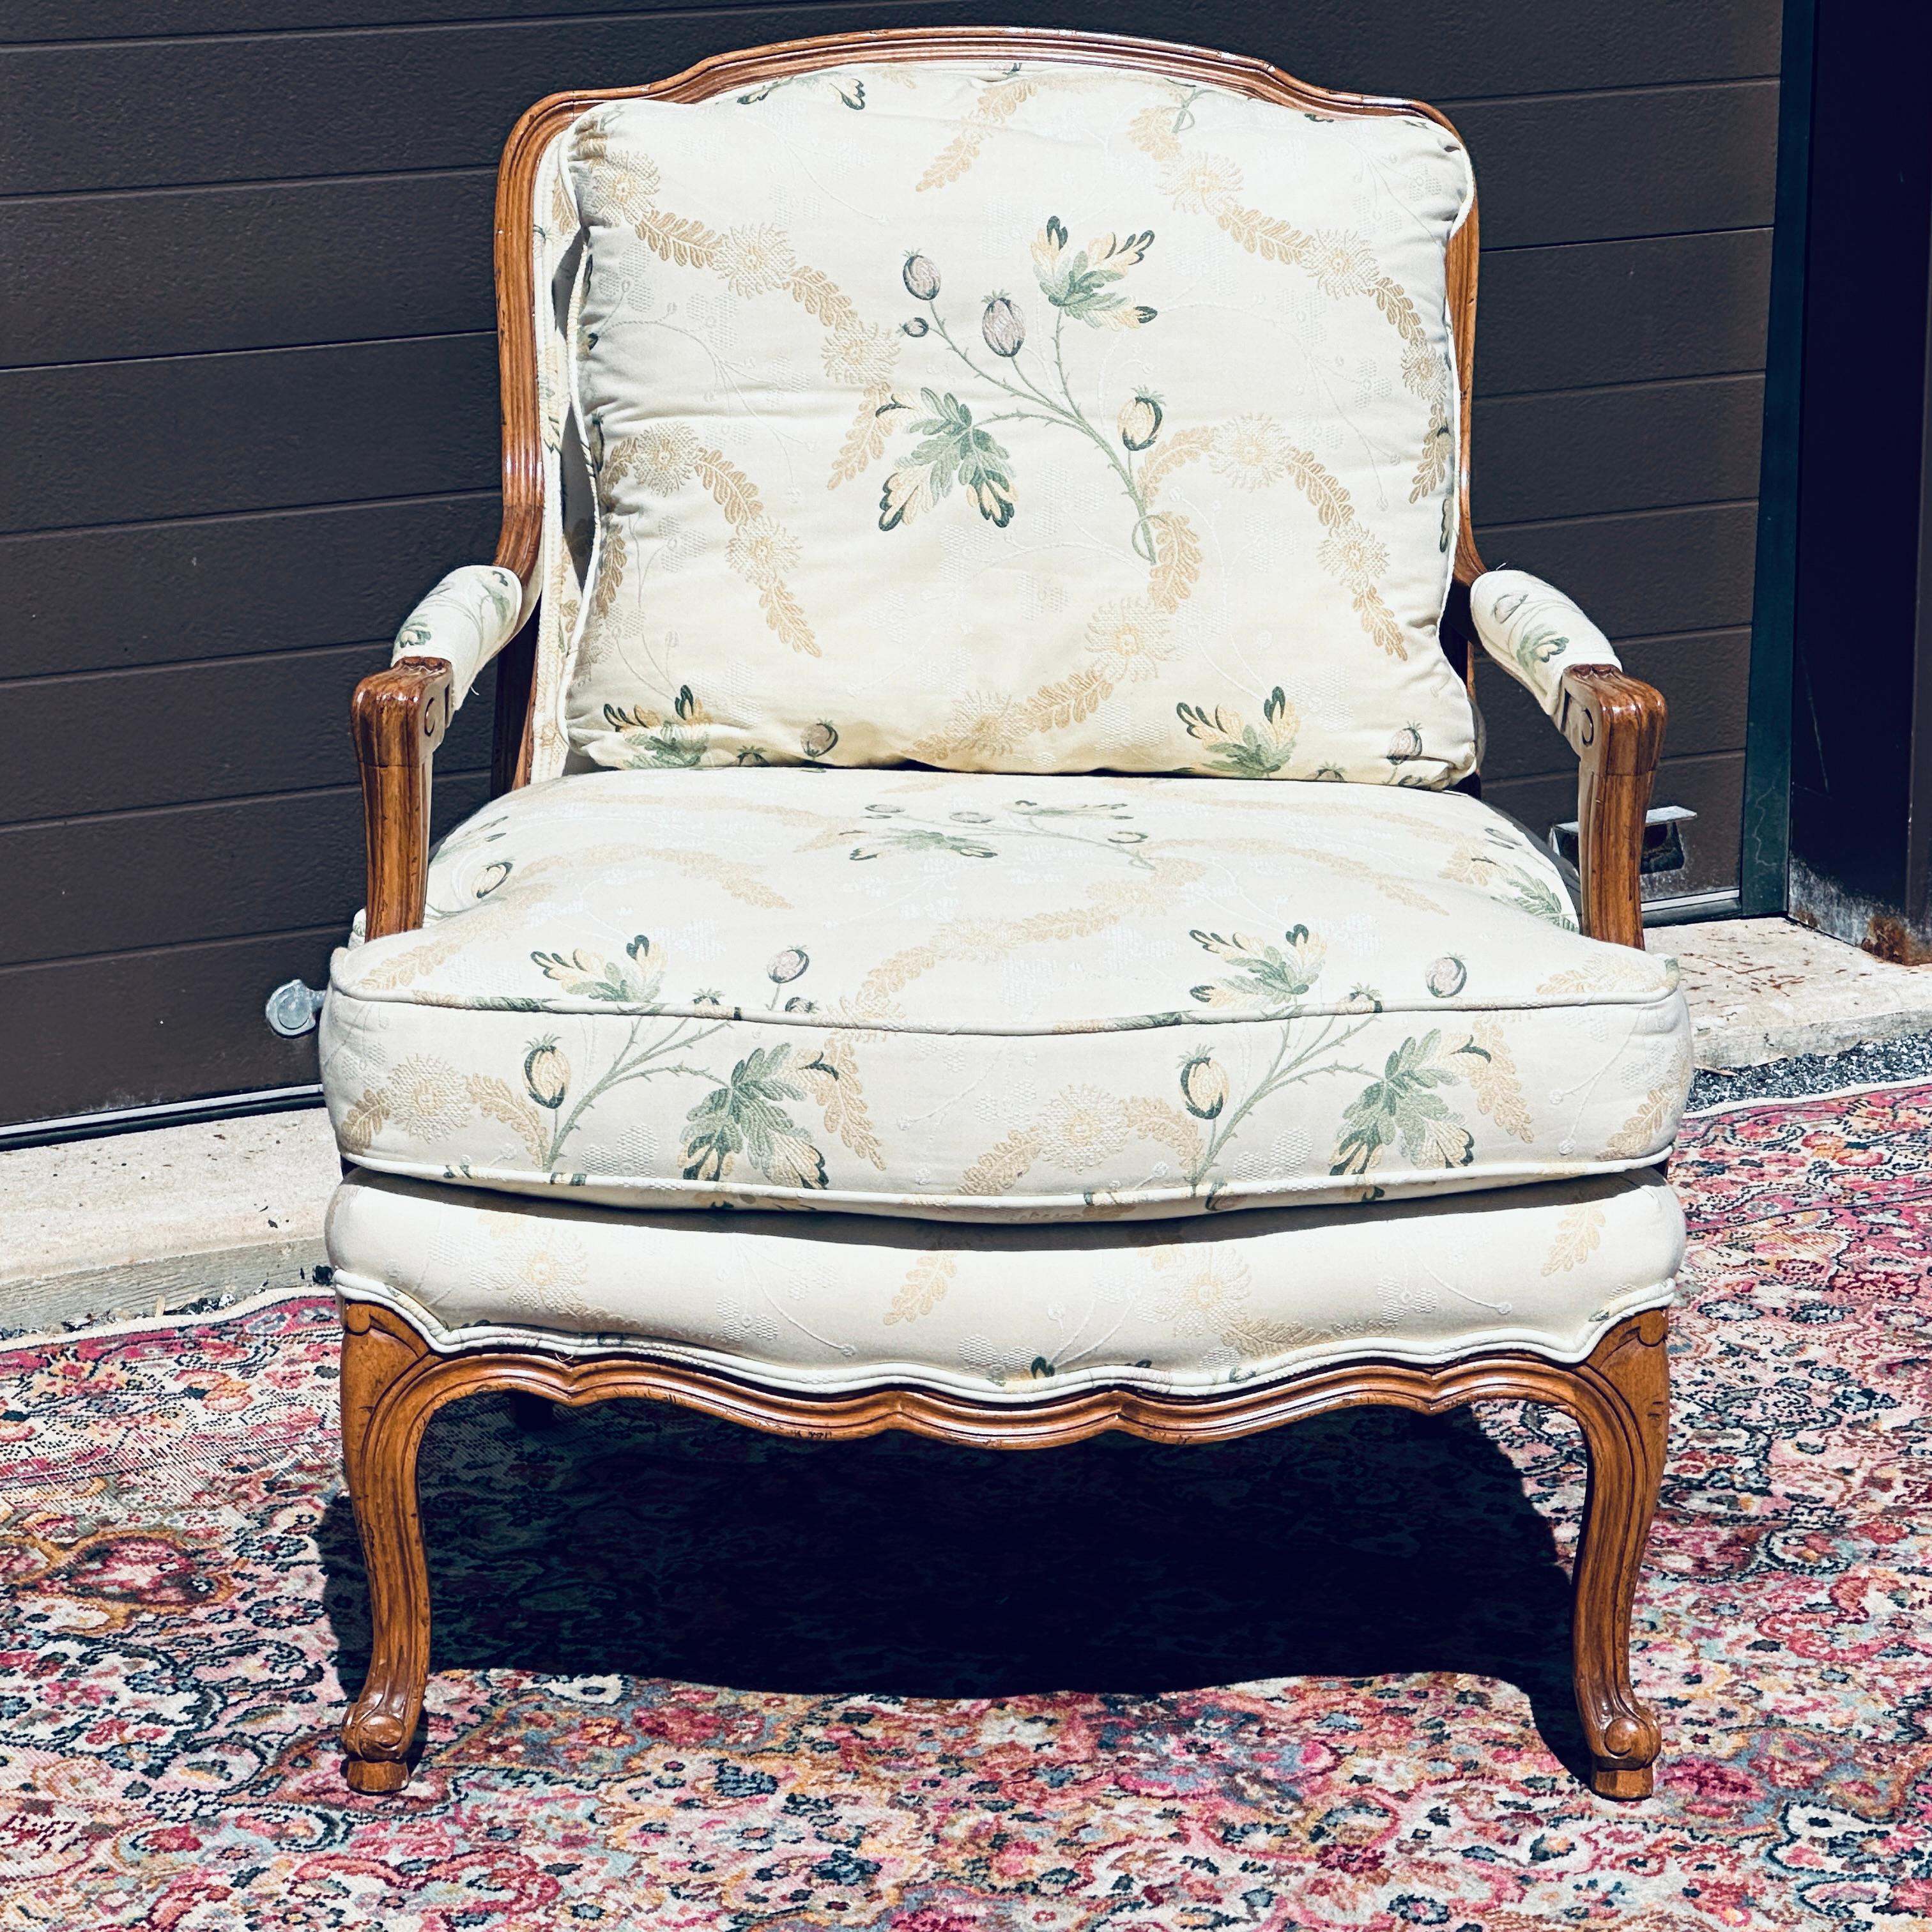 High end French style open arm bergere chair by Baker Furniture Company featuring a carved fruitwood frame with original floral upholstery. The loose seat and back cushions are flippable. The main color of the upholstery is Cream.